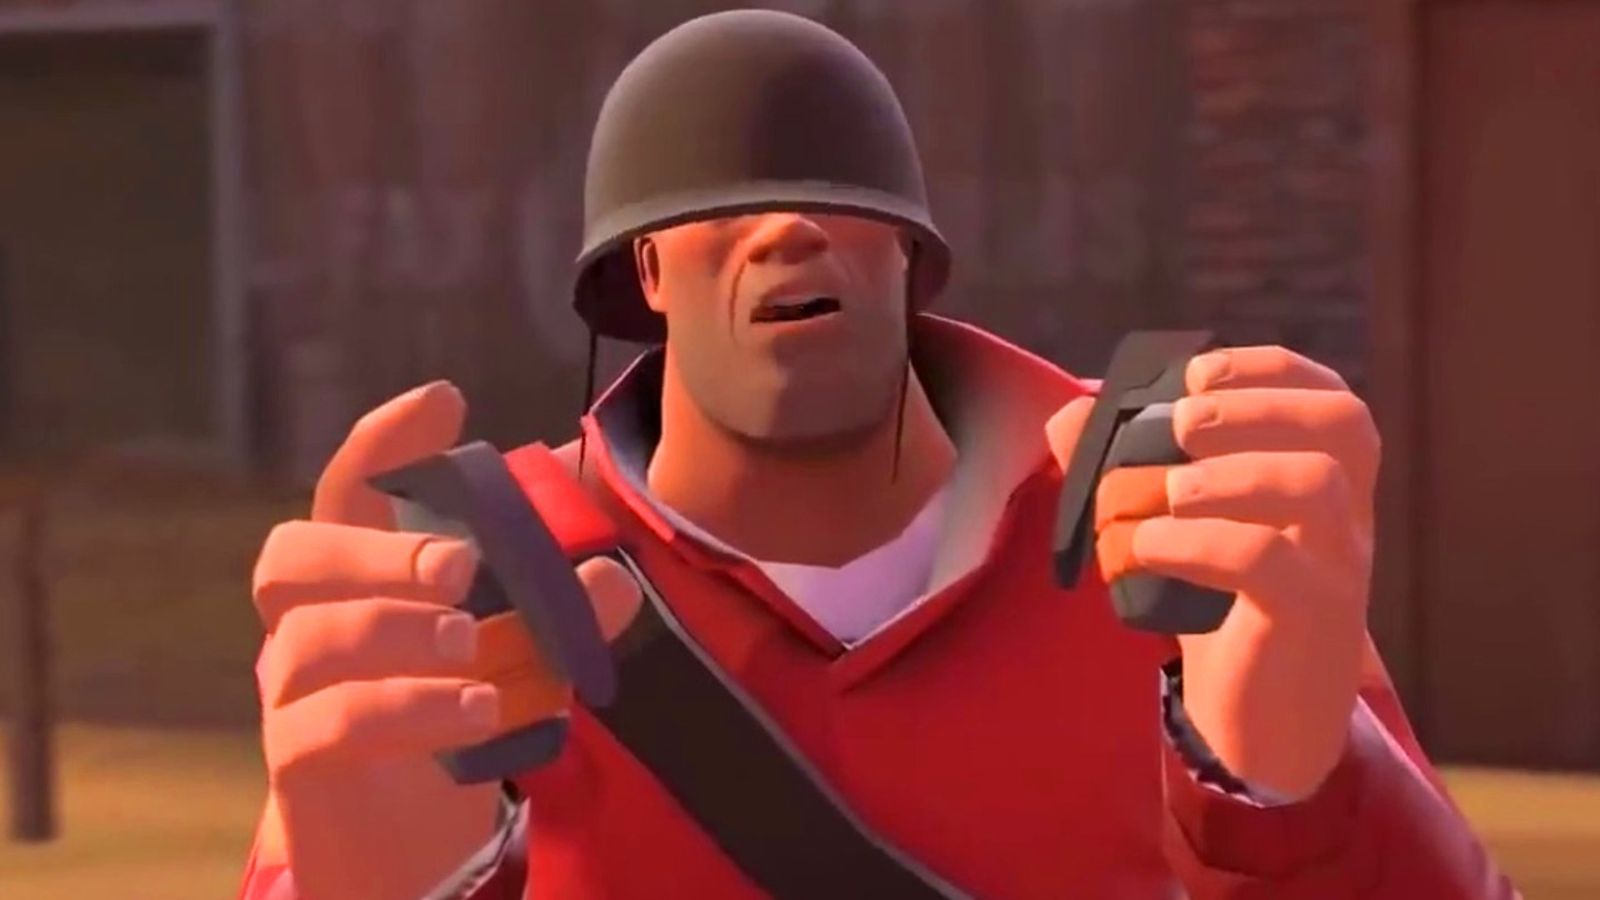 The soldier from Team Fortress 2 looking confused 